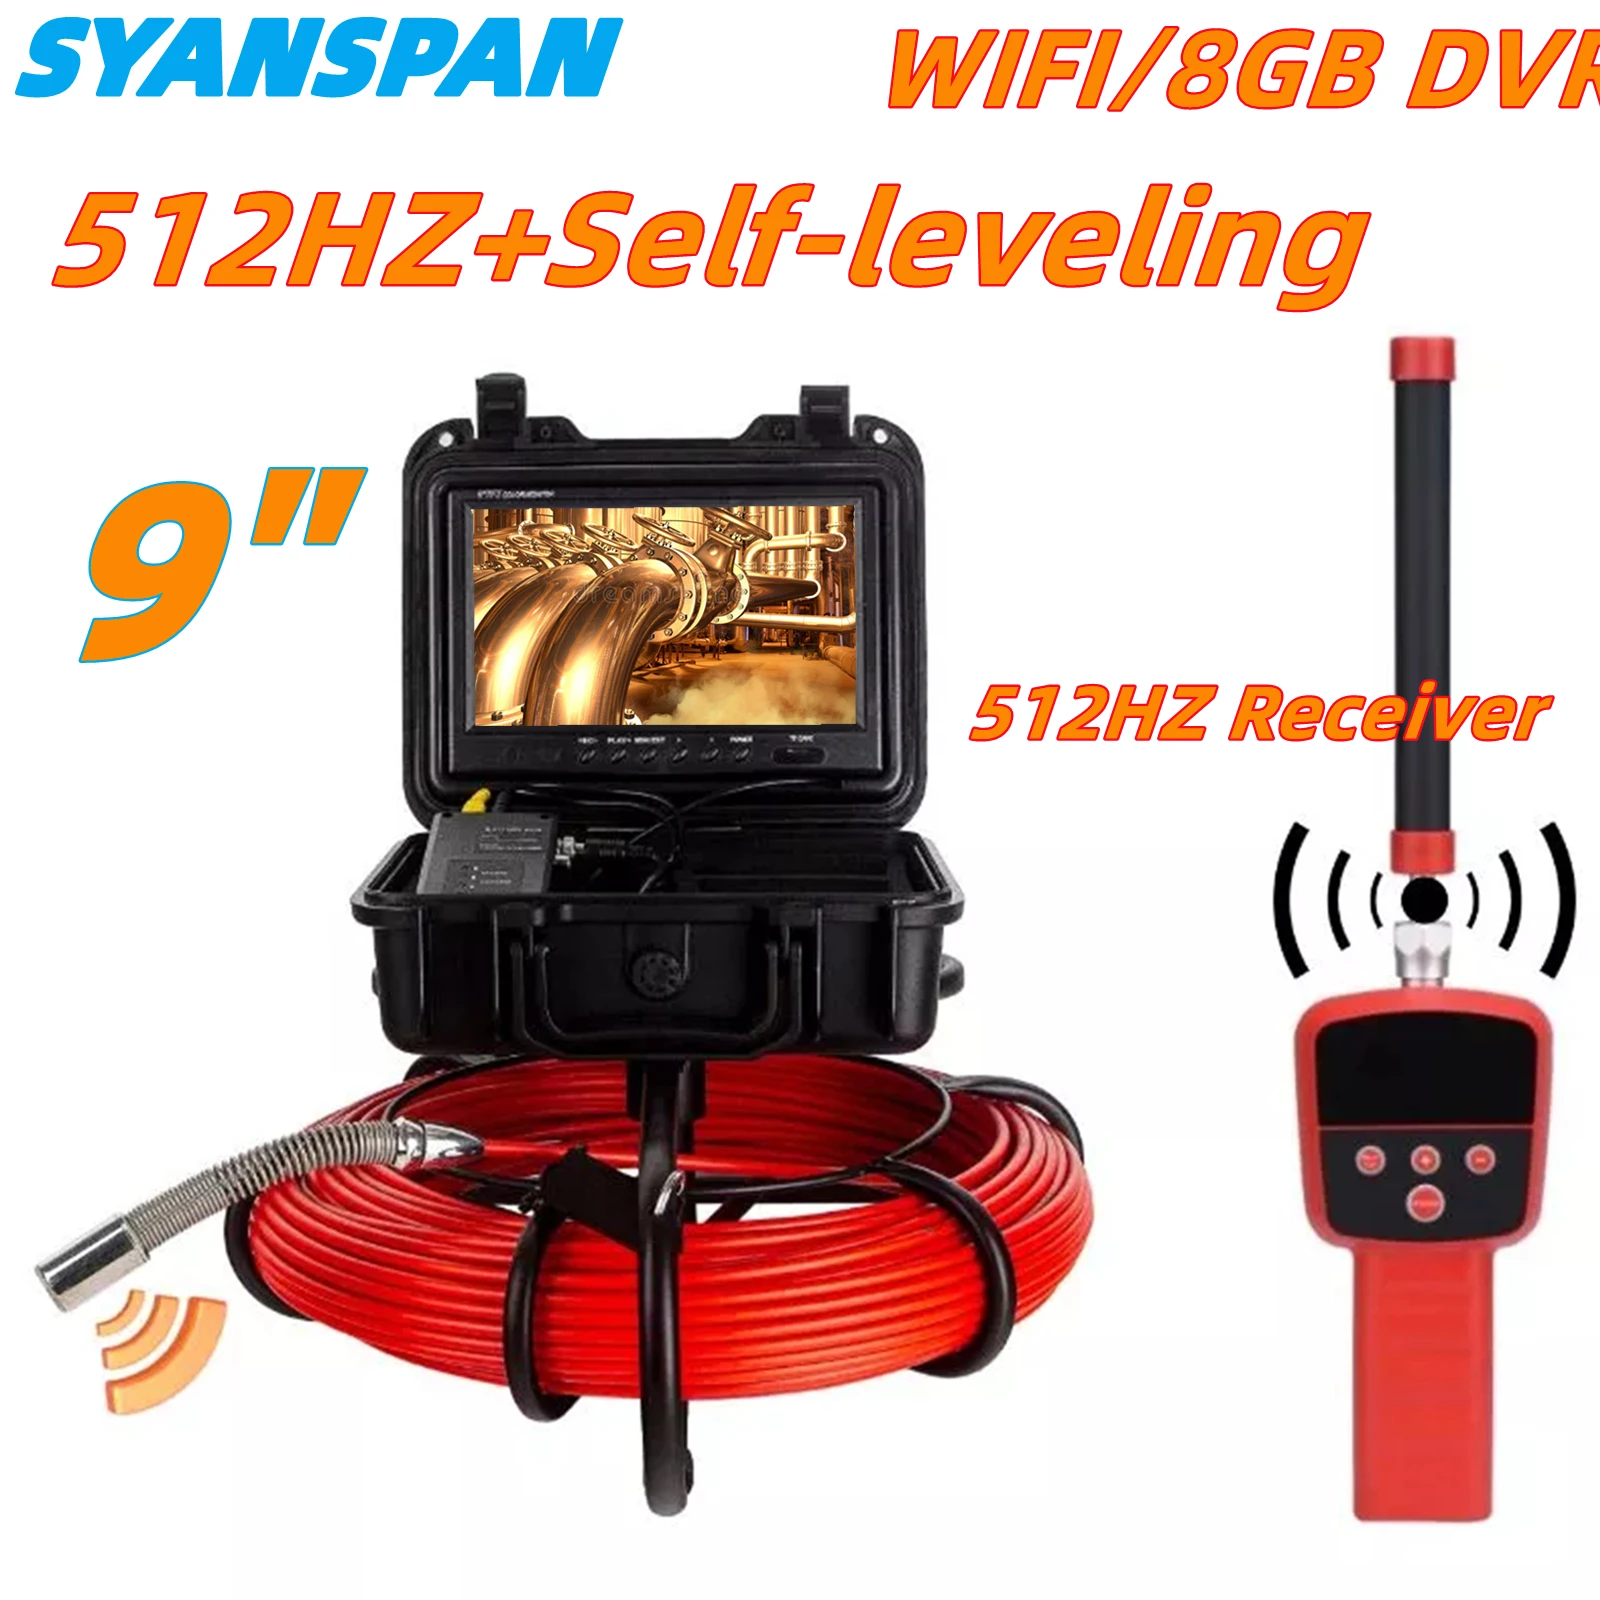 

Pipe Inspection Camera Self-leveling+512HZ Sonde+Locator/Receiver, Sewer Drain Endoscope 9Inch HD Screen 7MM Cable WIFI/8GB DVR